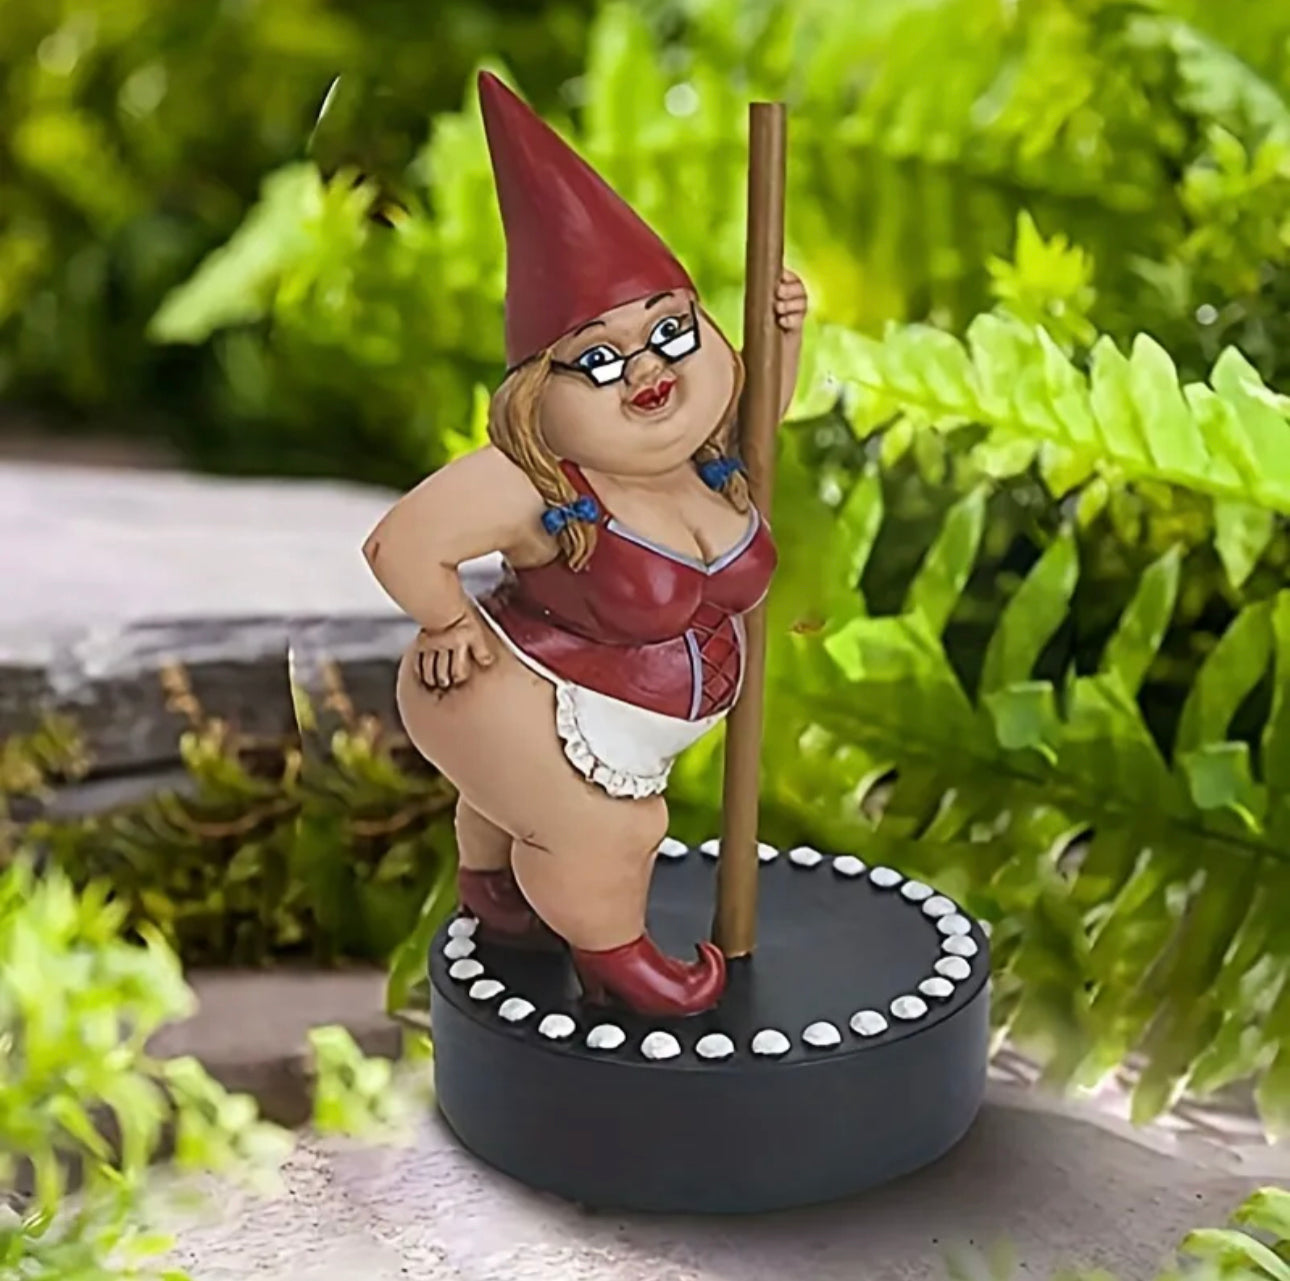 Add a Touch of Magic to Your Garden with this Adorable Pole Dancing Goblin Statue!